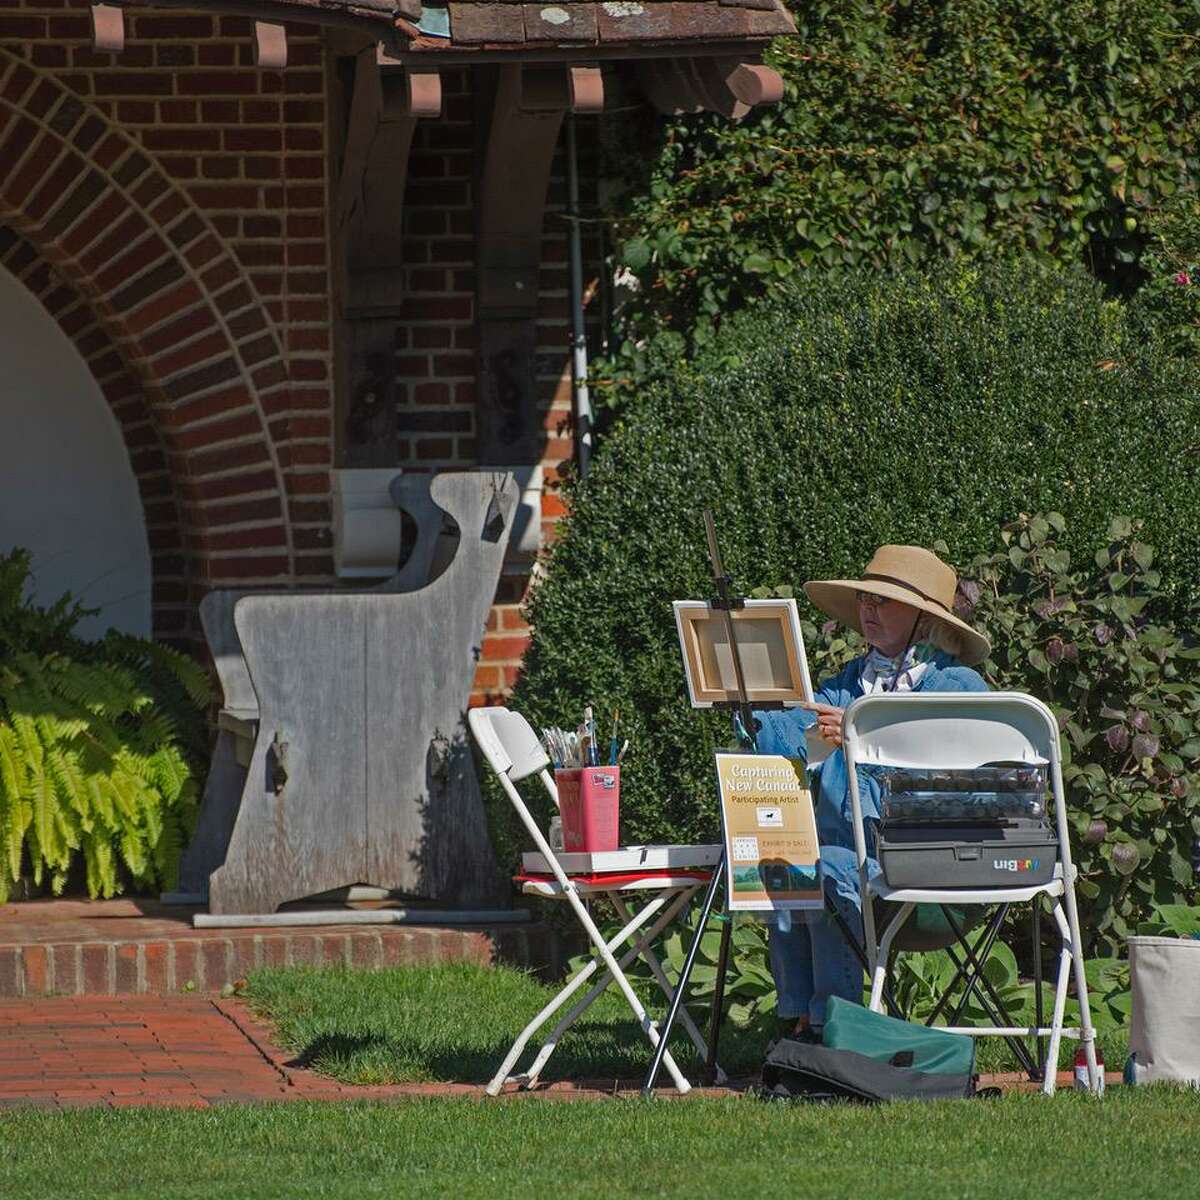 The Carriage Barn Arts Center exhibit “Capturing Waveny” features art created by local artists during a plein air event earlier this month. The show runs Oct. 24 through Nov. 2.